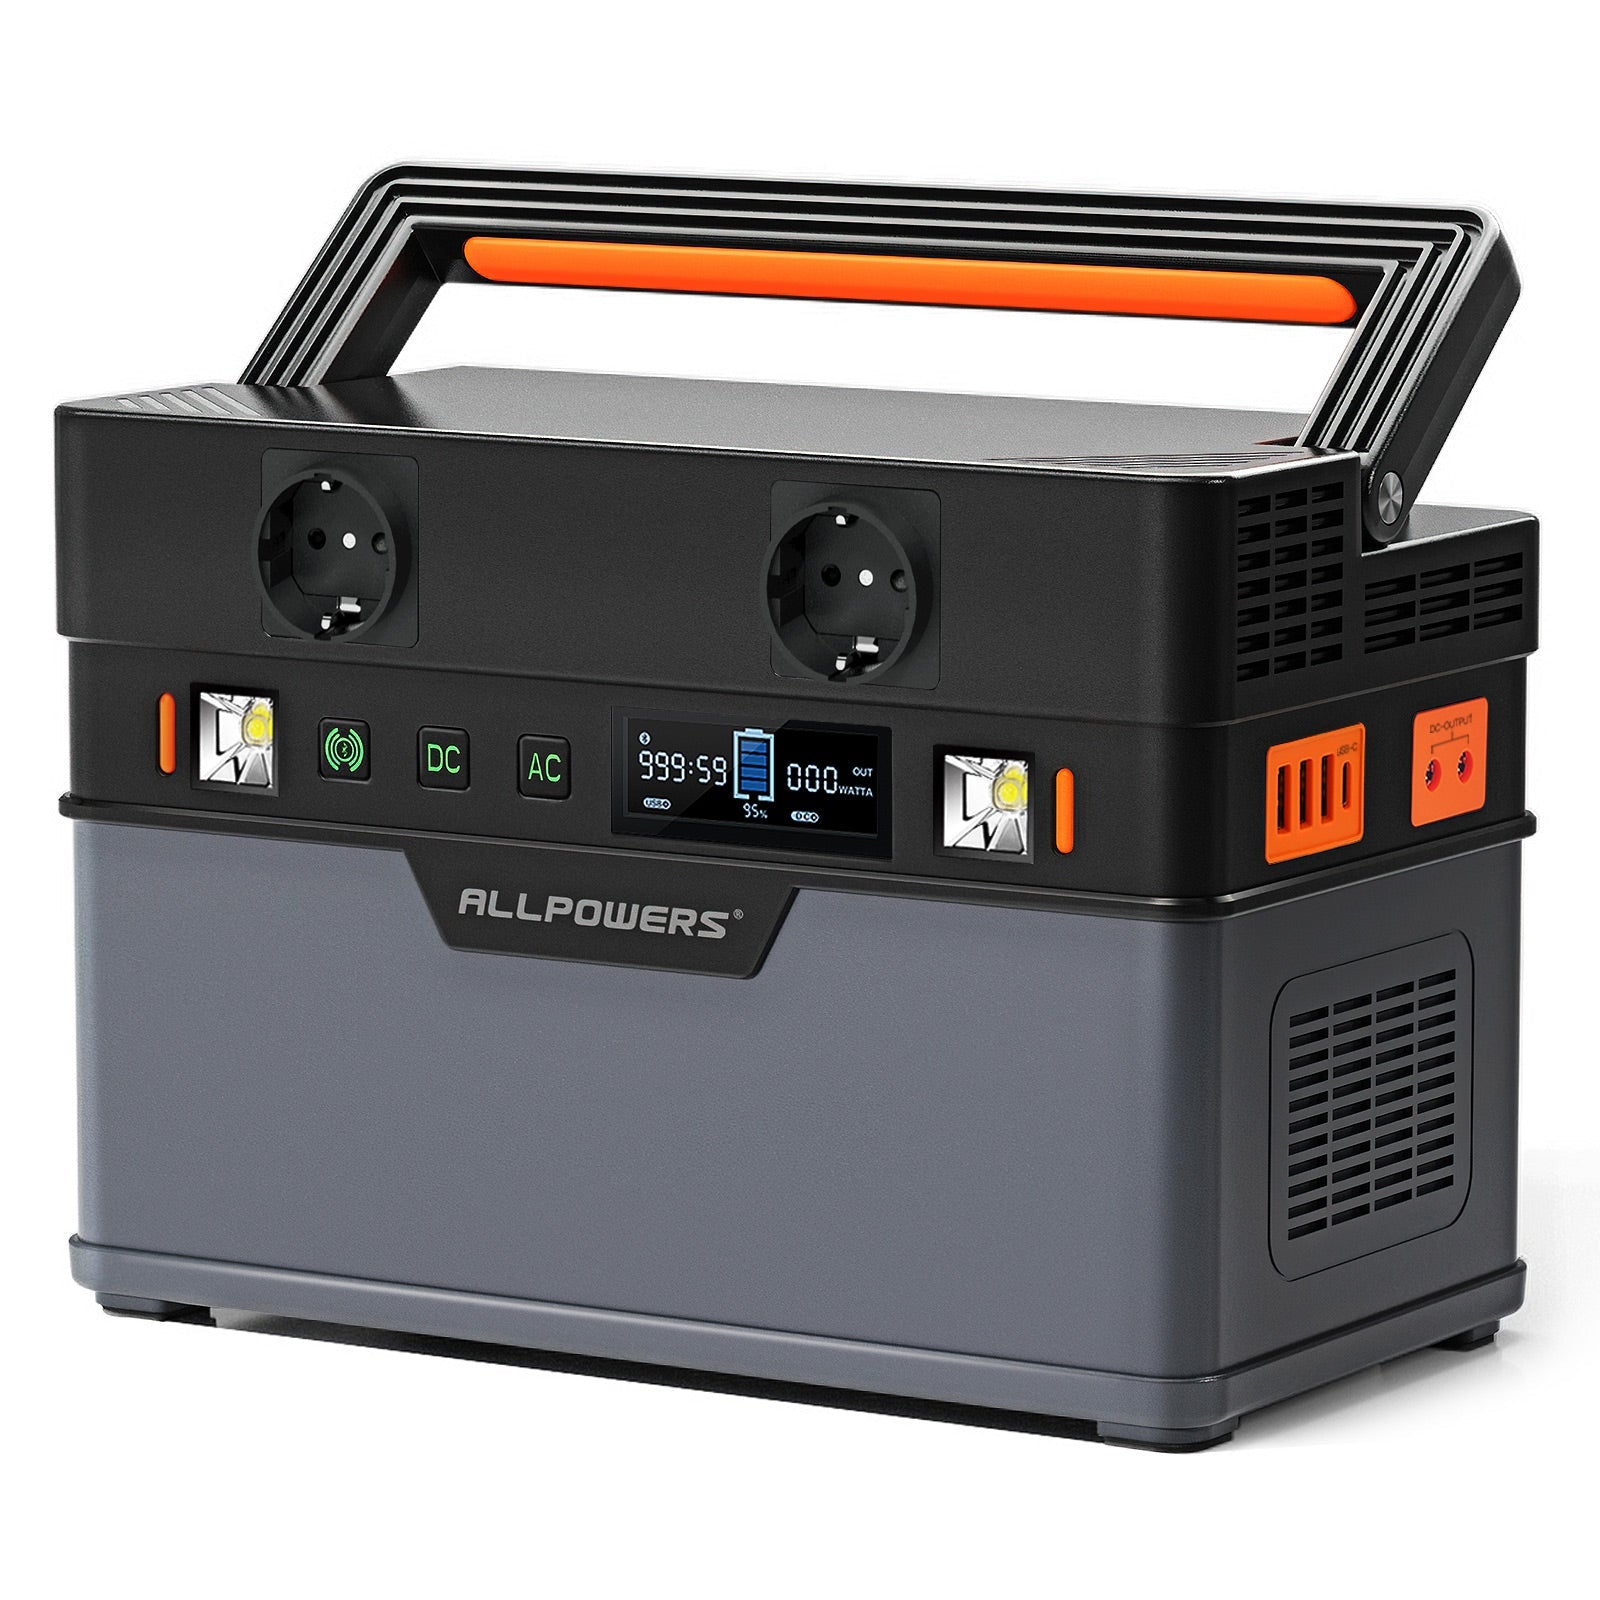 ALLPOWERS S700 Solar Generator Portable Power Station 700W 606Wh with SP027 100W Solar Panels